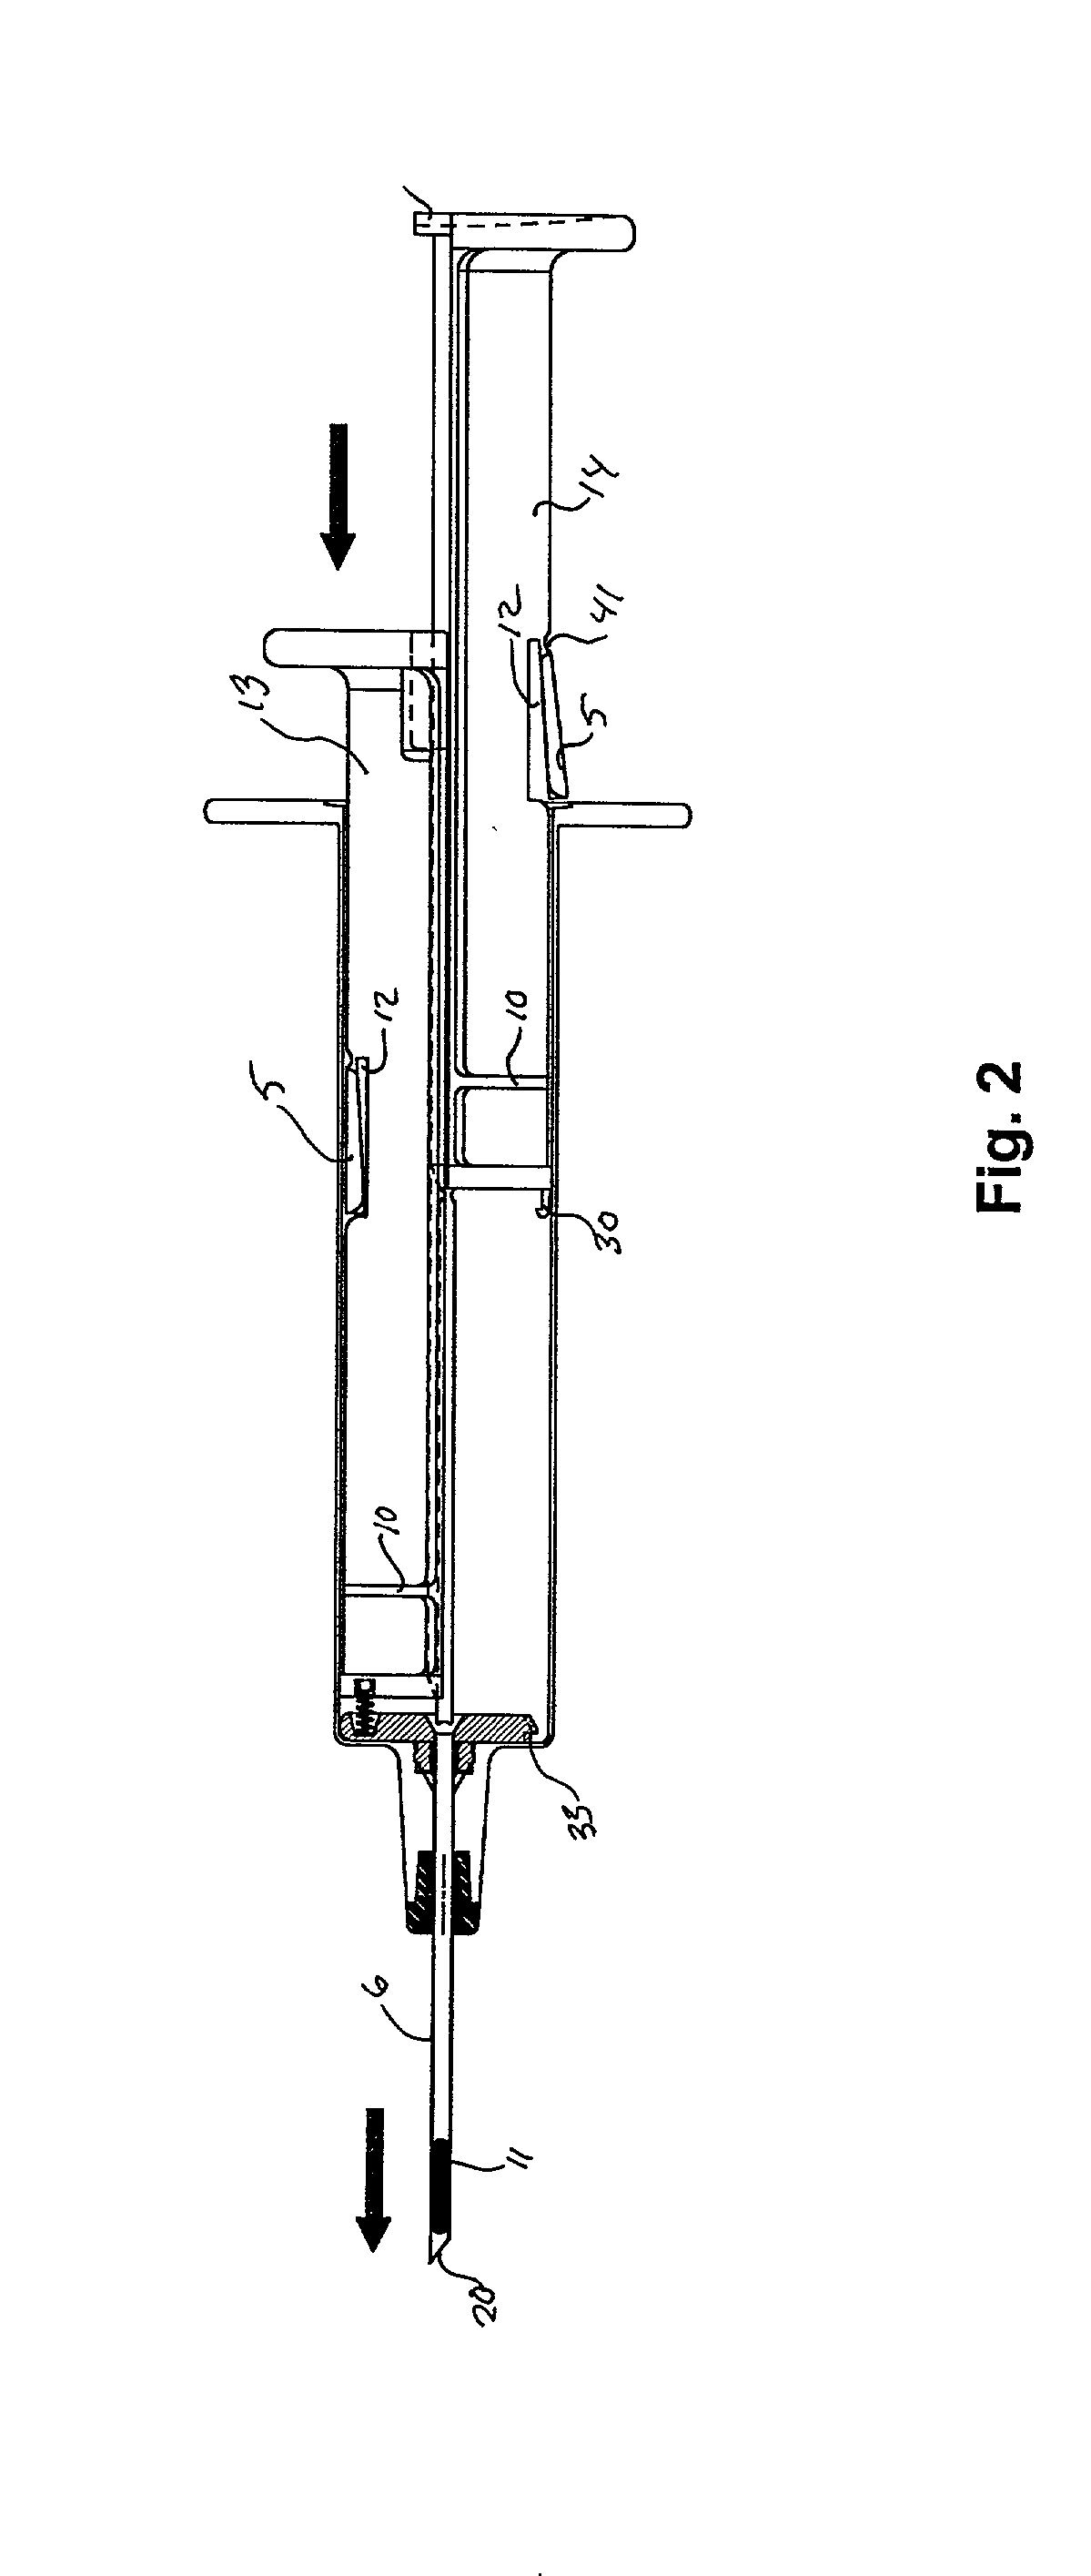 Hypodermic implant device